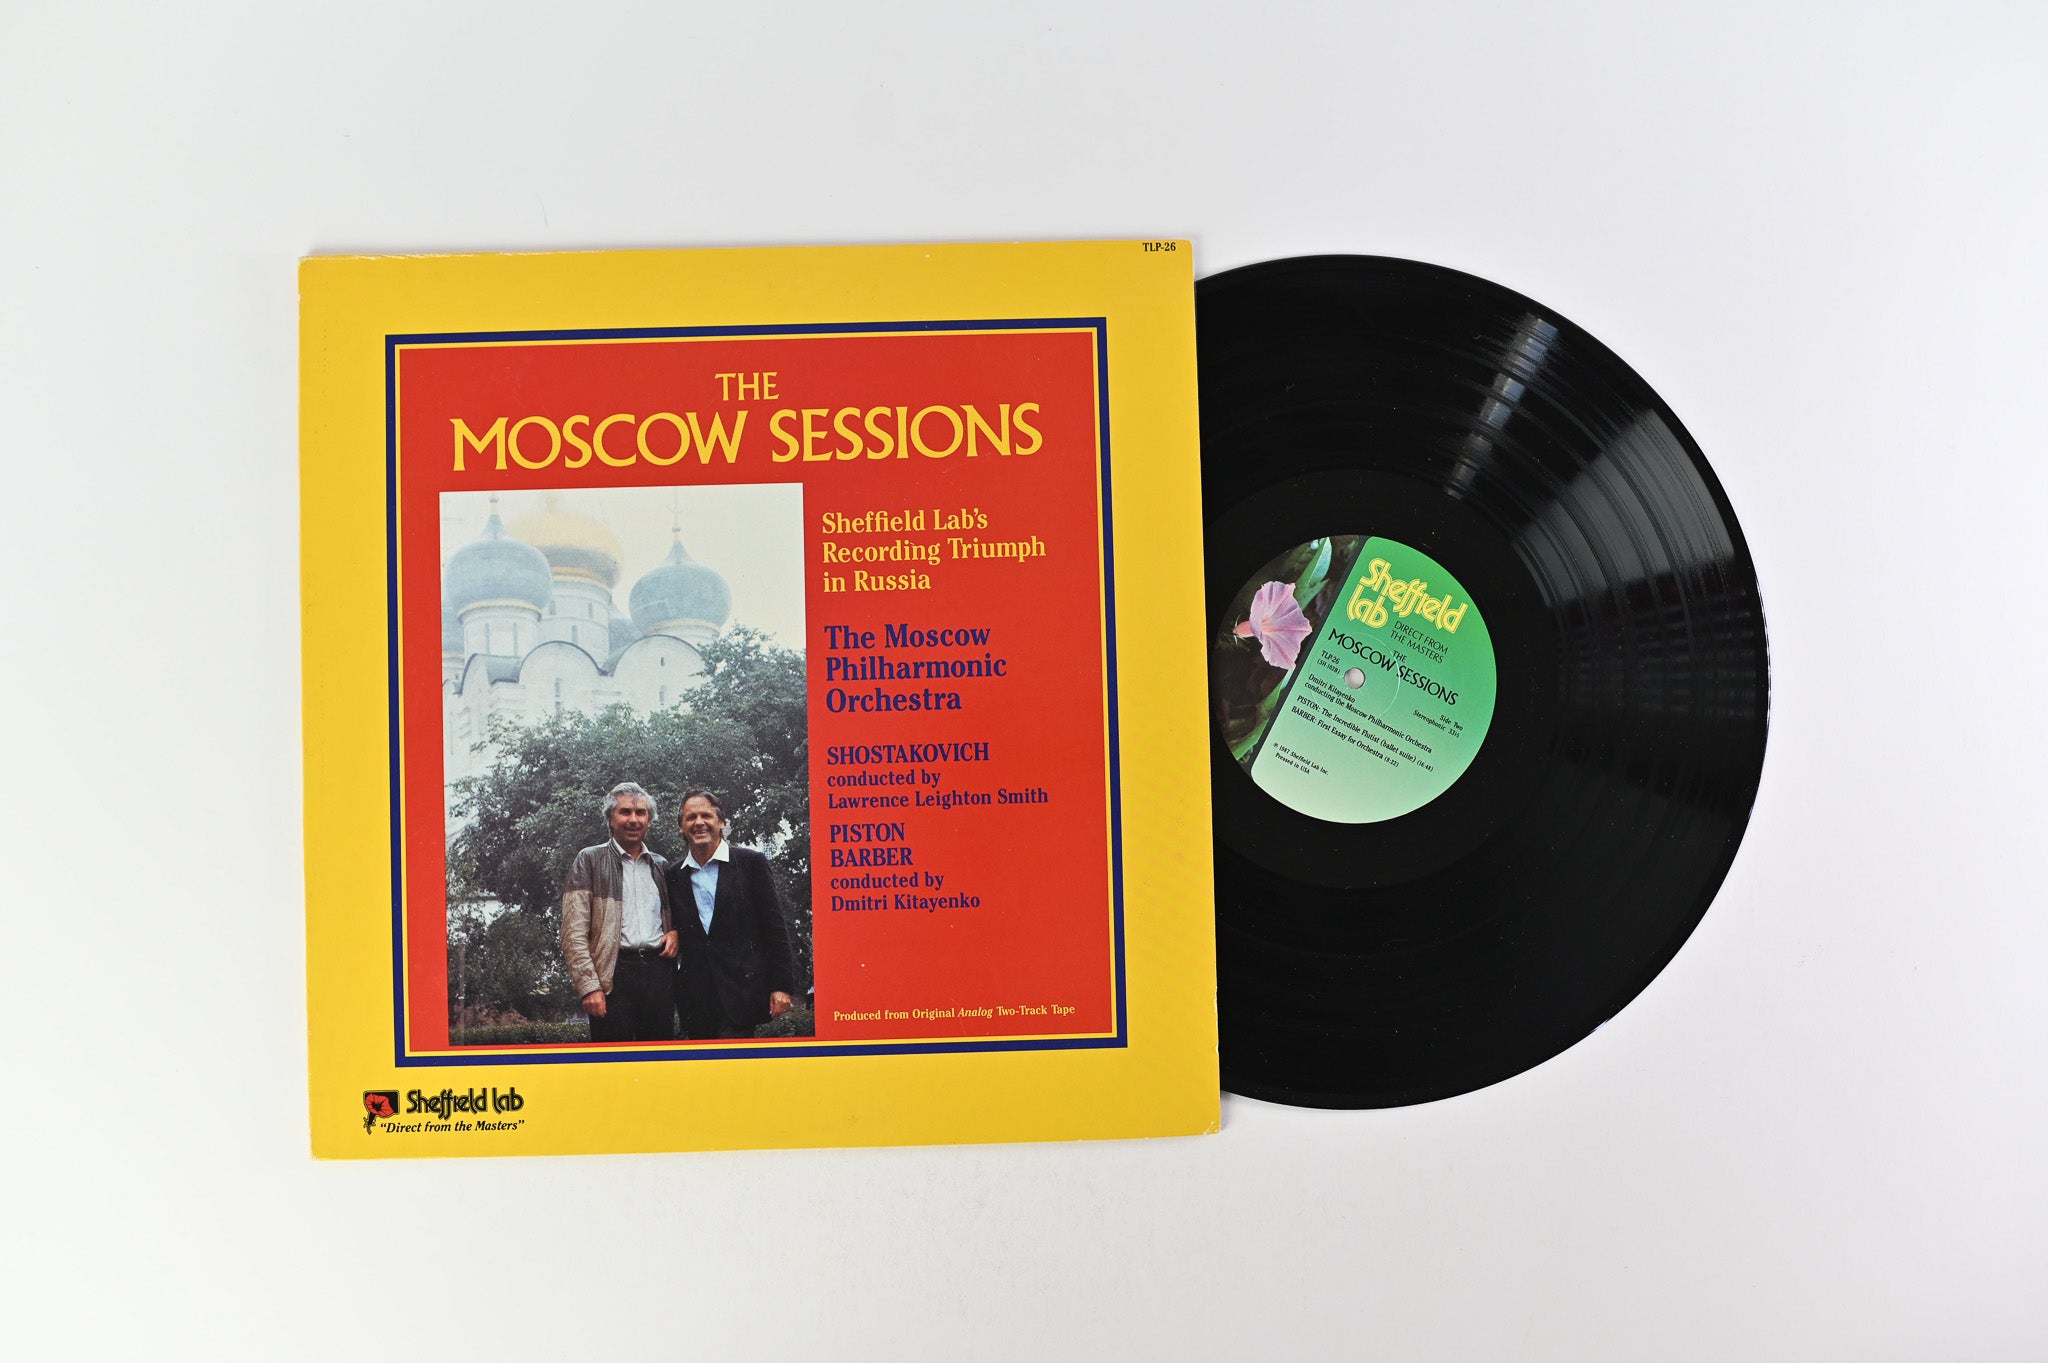 Moscow Philharmonic Orchestra - The Moscow Sessions on Sheffield Lab